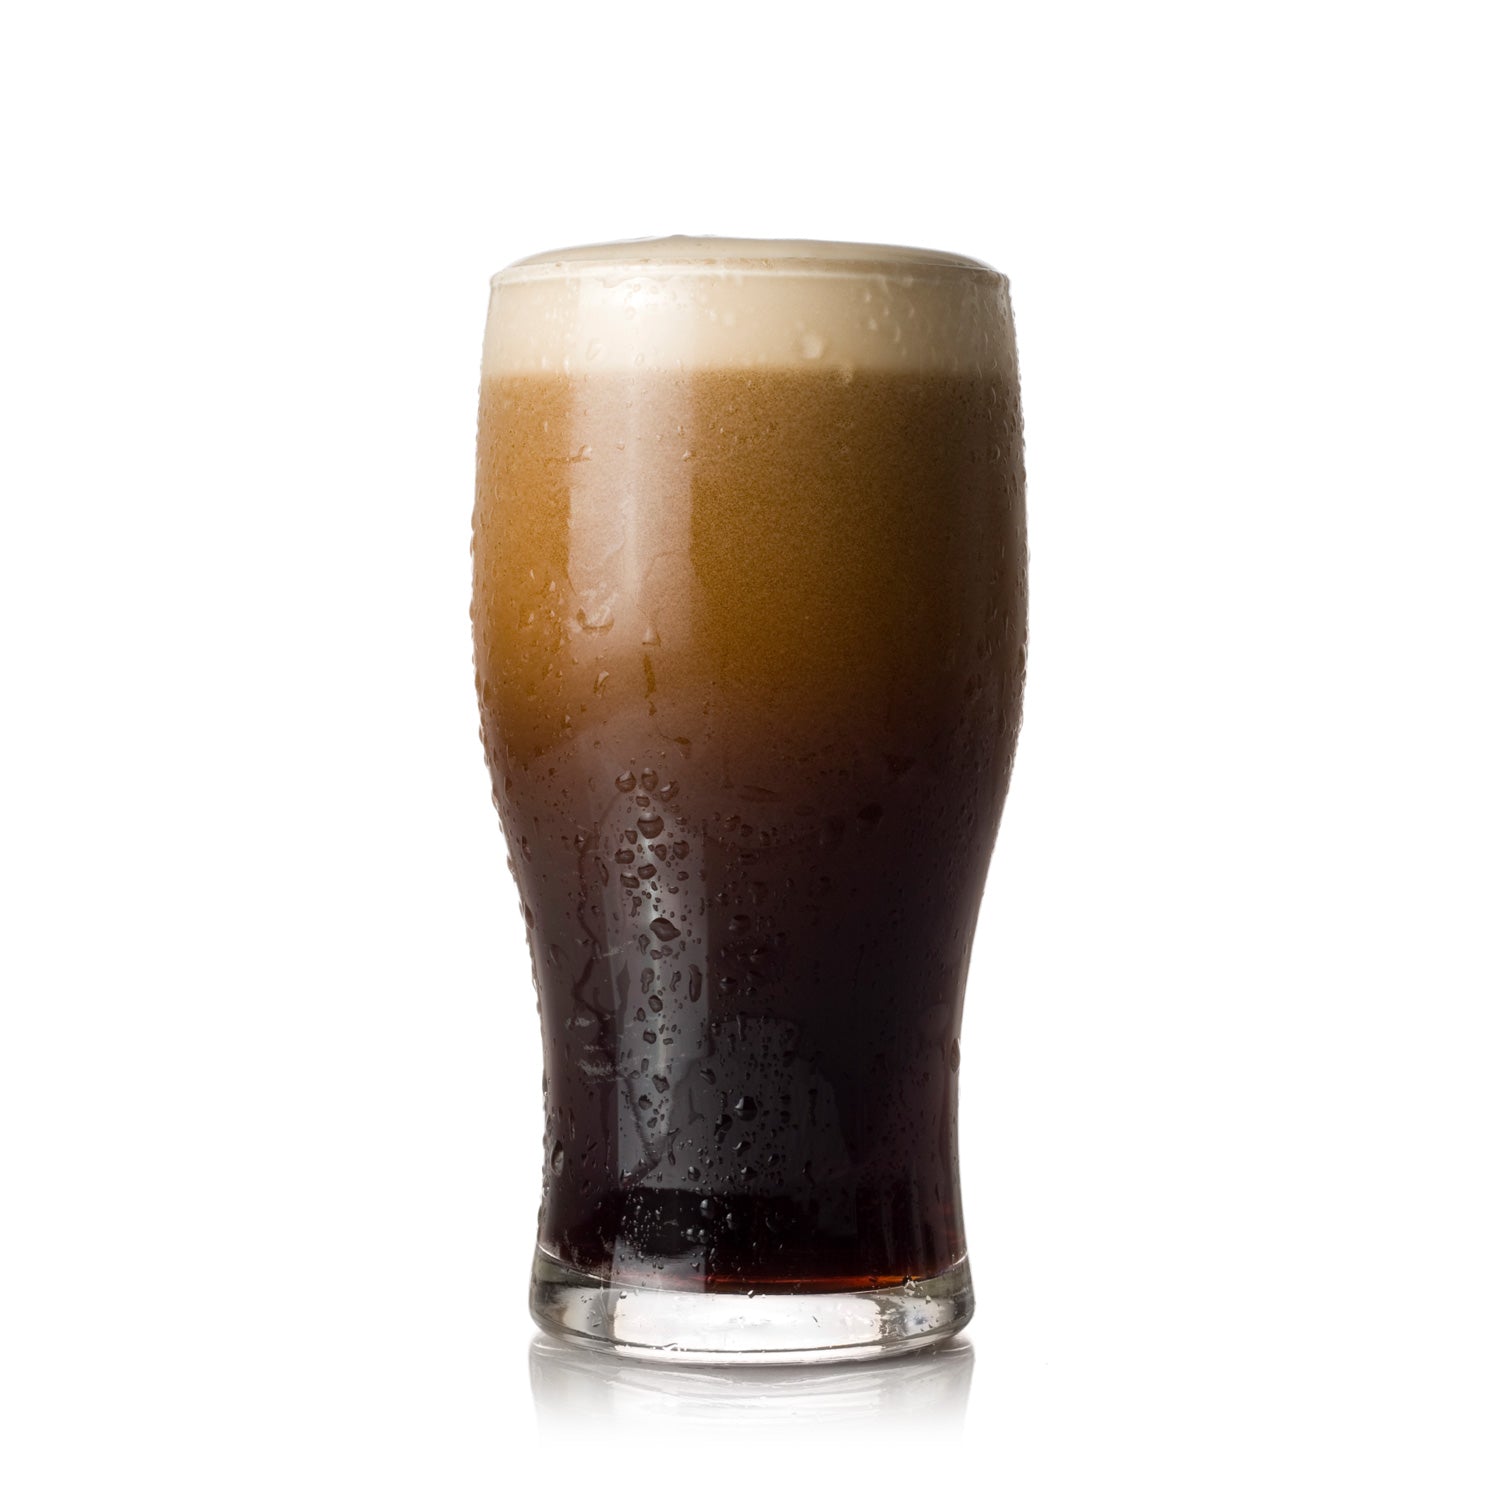 ATF Oatmeal Stout - All Things Fermented | Home Brew Shop NZ | Supplies | Equipment